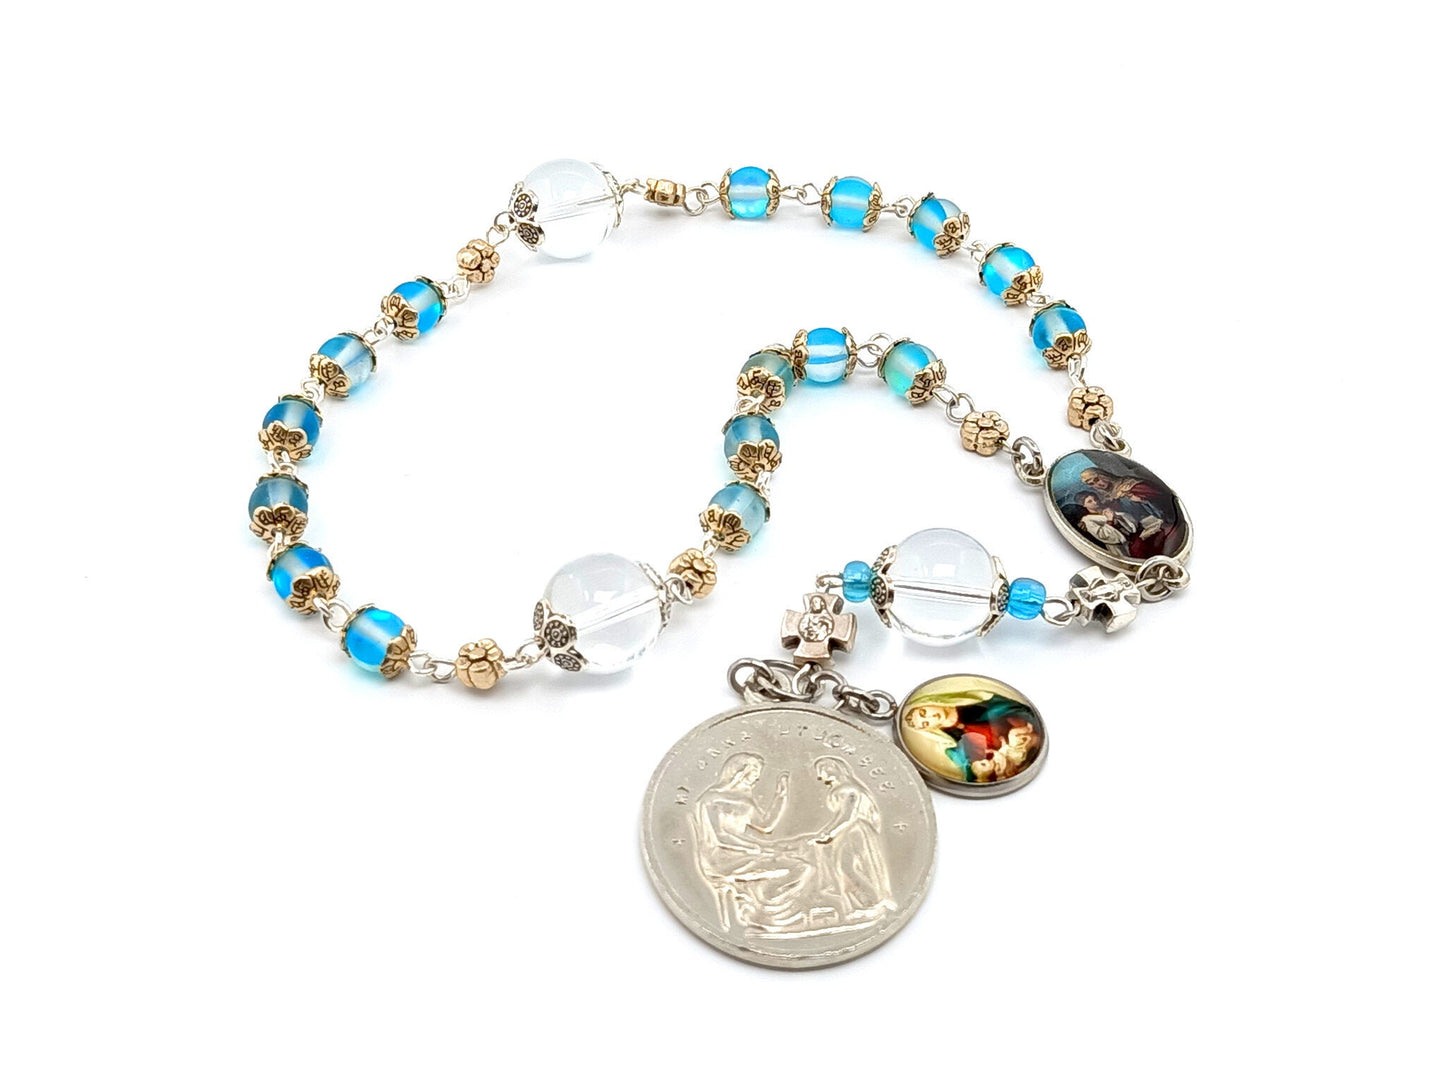 Saint Ann unique rosary beads prayer chaplet with quartz and crystal gemstone beads, Sacred Heart and Virgin and Child medals.